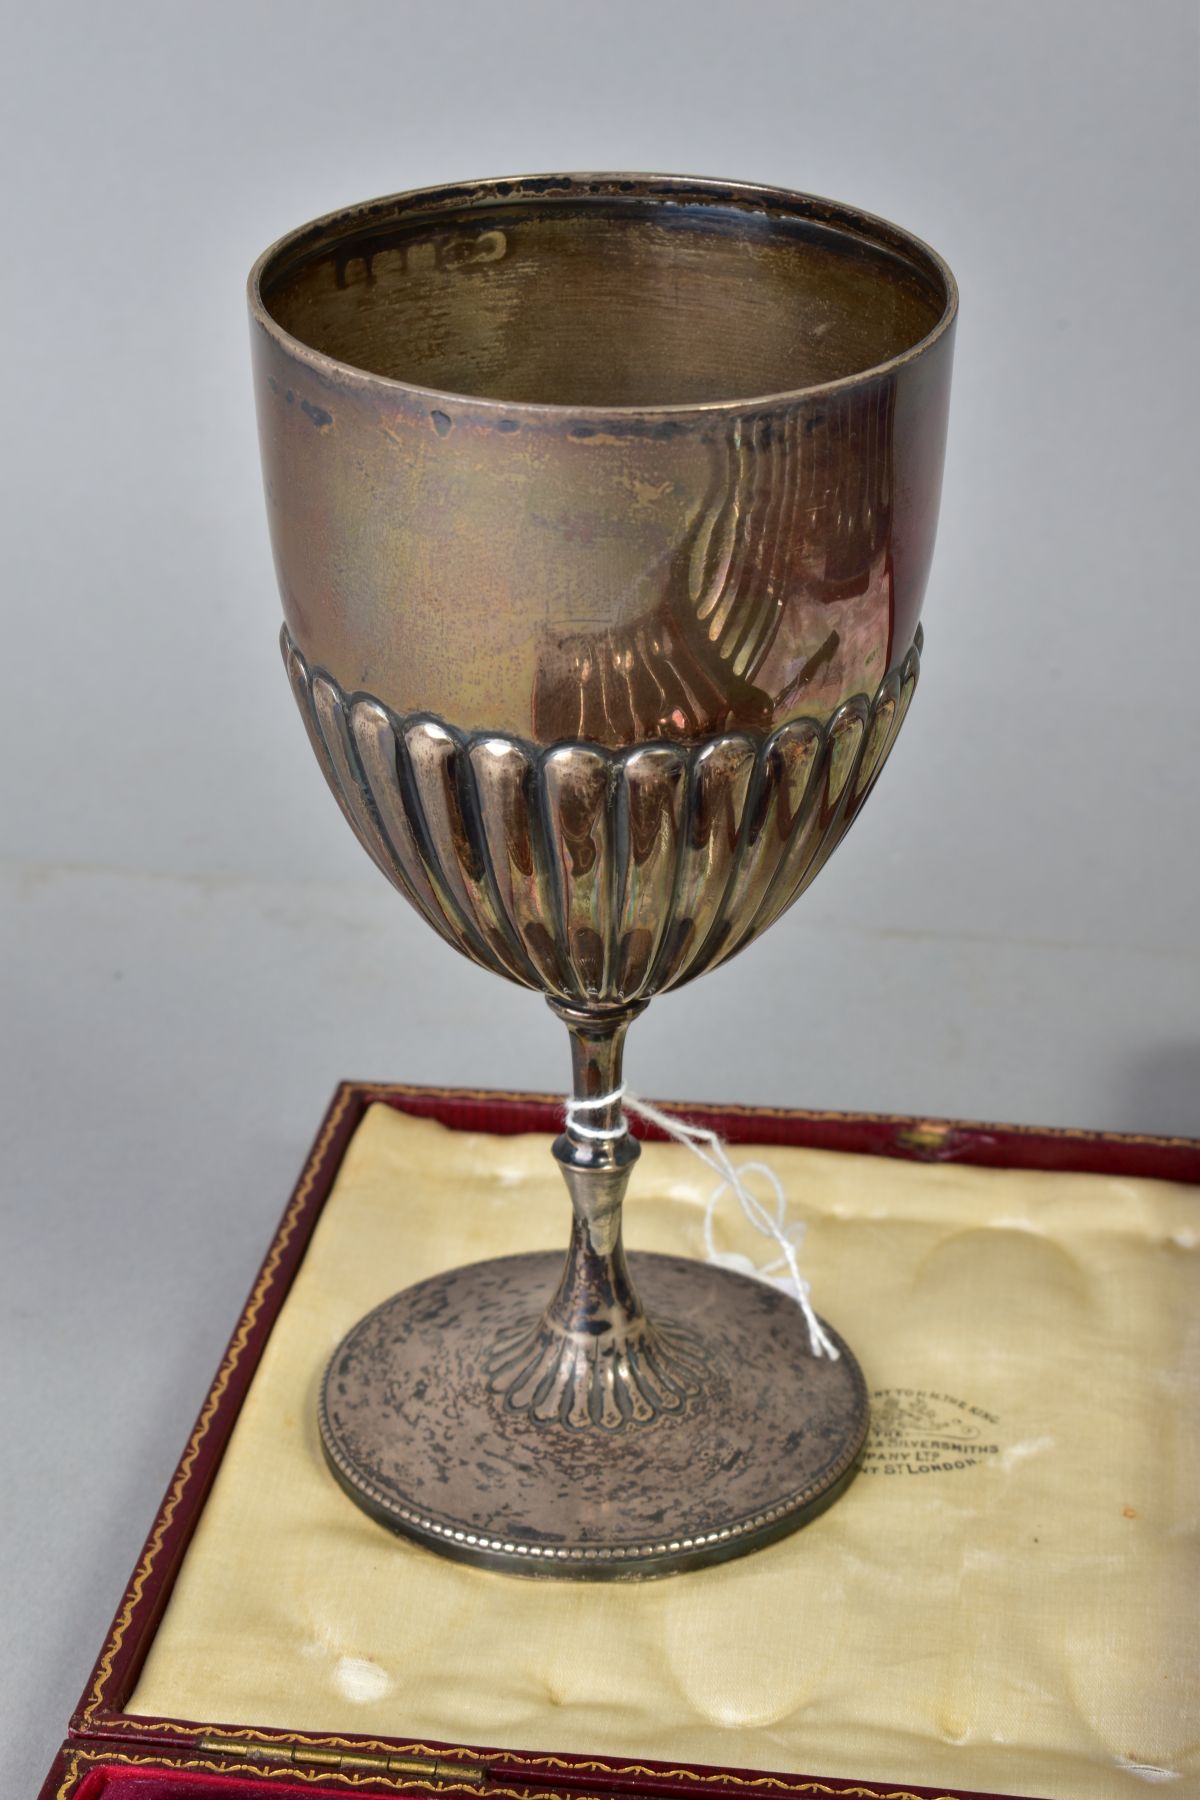 AN EDWARDIAN SILVER TROPHY CUP, stop reeded decoration, slender stem with soldered repair, - Image 2 of 7